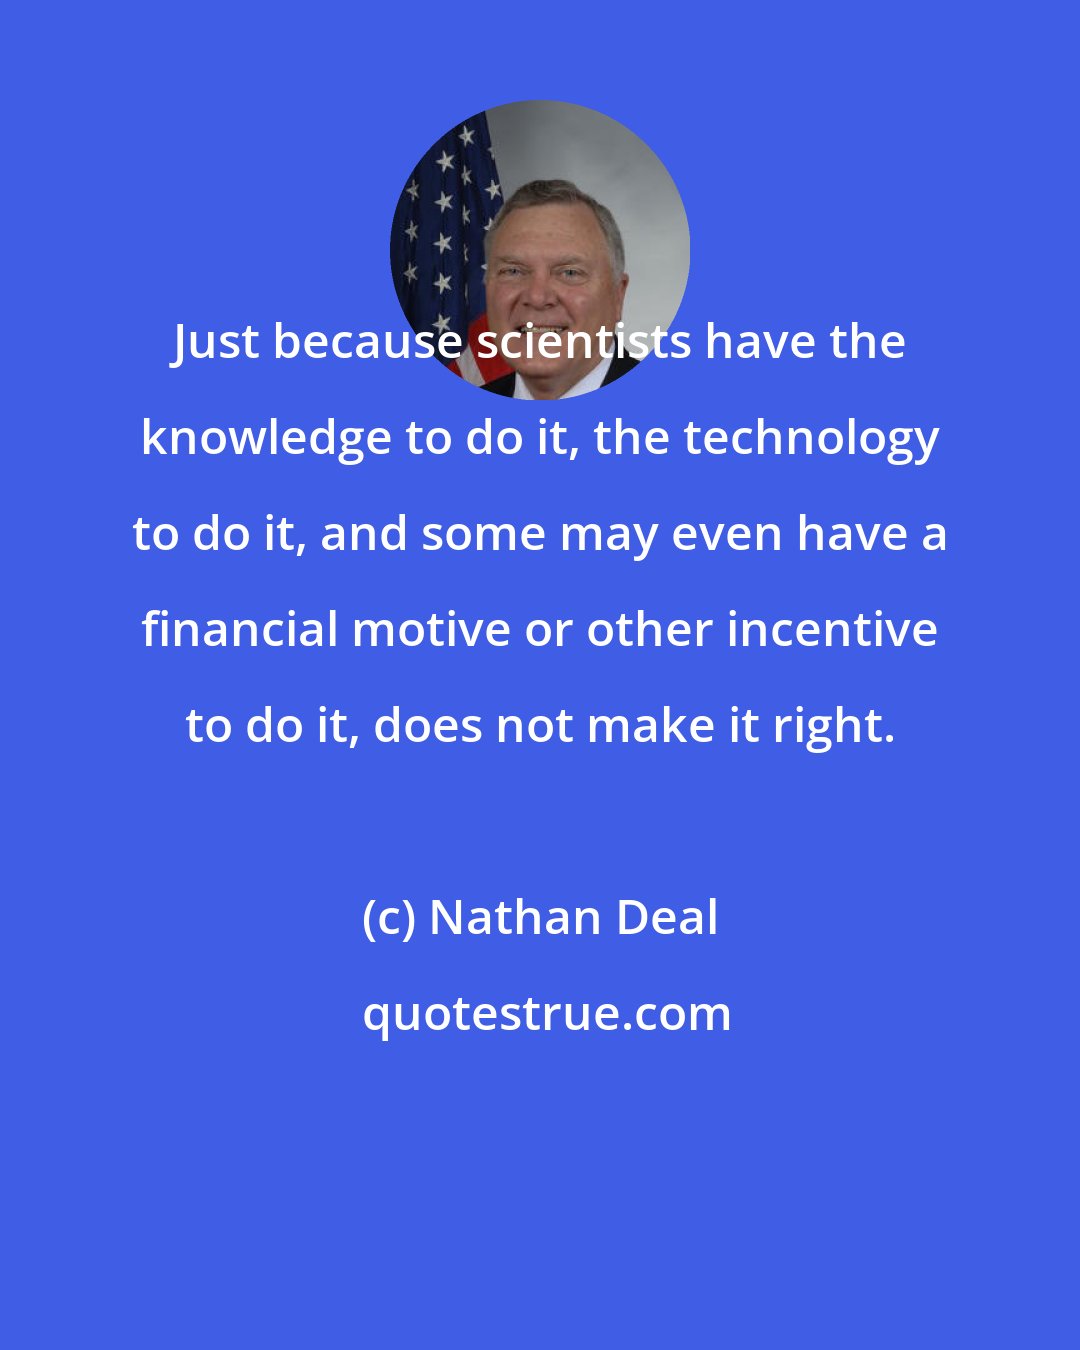 Nathan Deal: Just because scientists have the knowledge to do it, the technology to do it, and some may even have a financial motive or other incentive to do it, does not make it right.